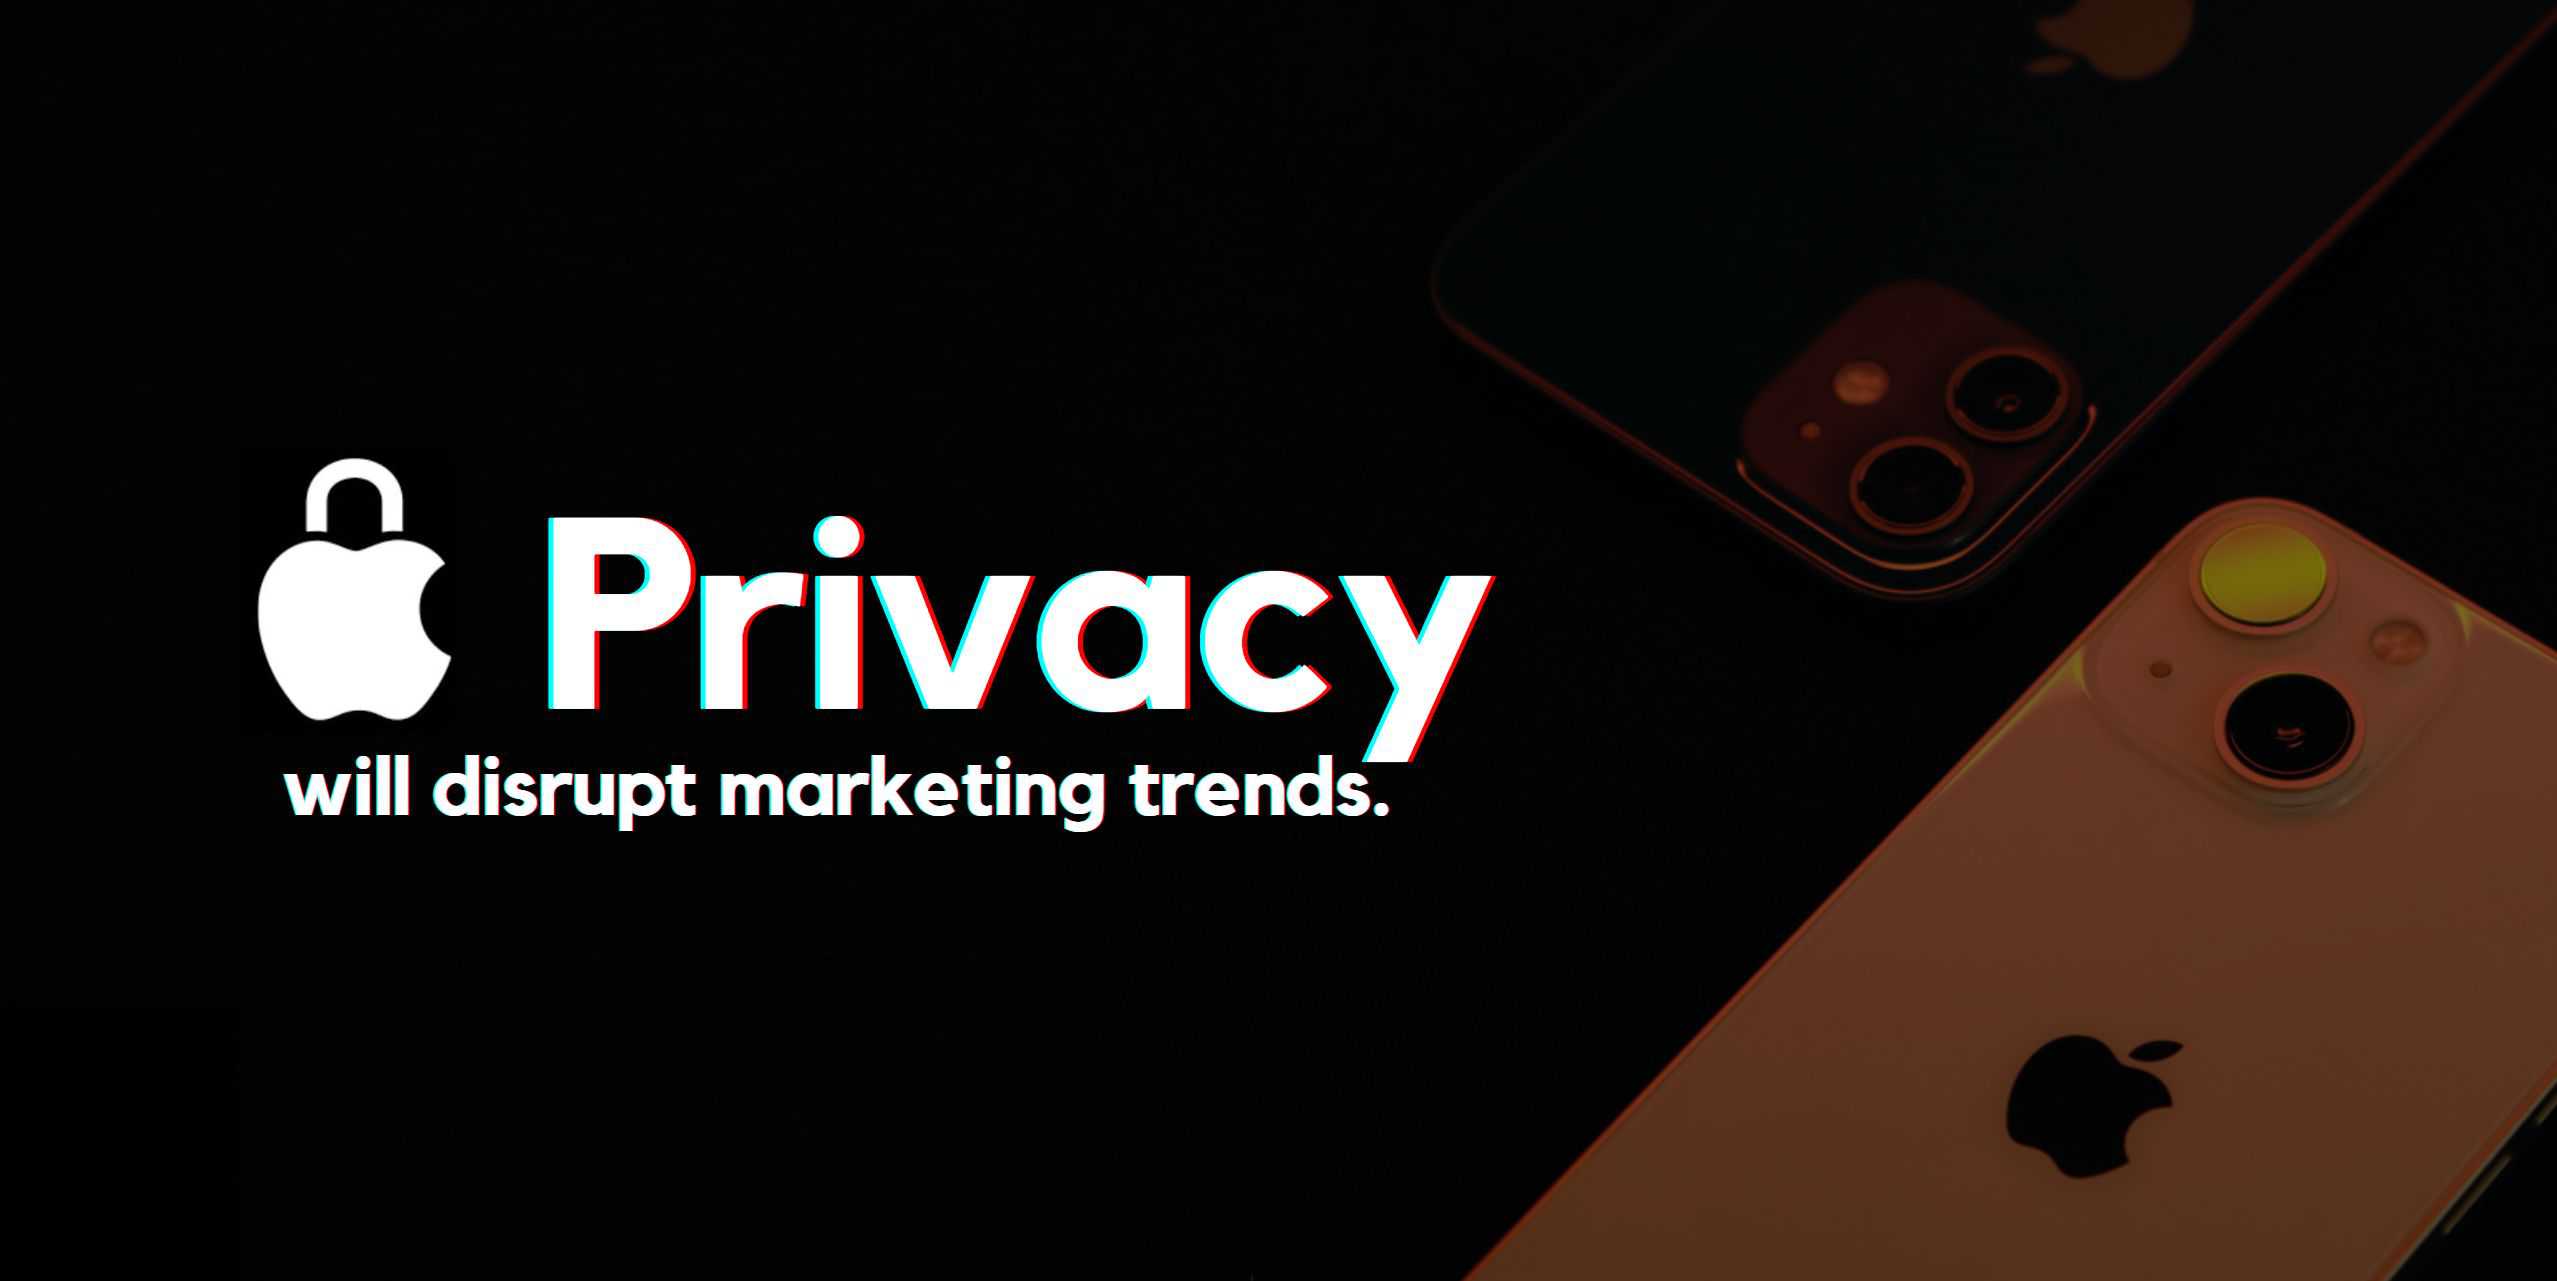 apples mail privacy protection will disrupt marketing trends